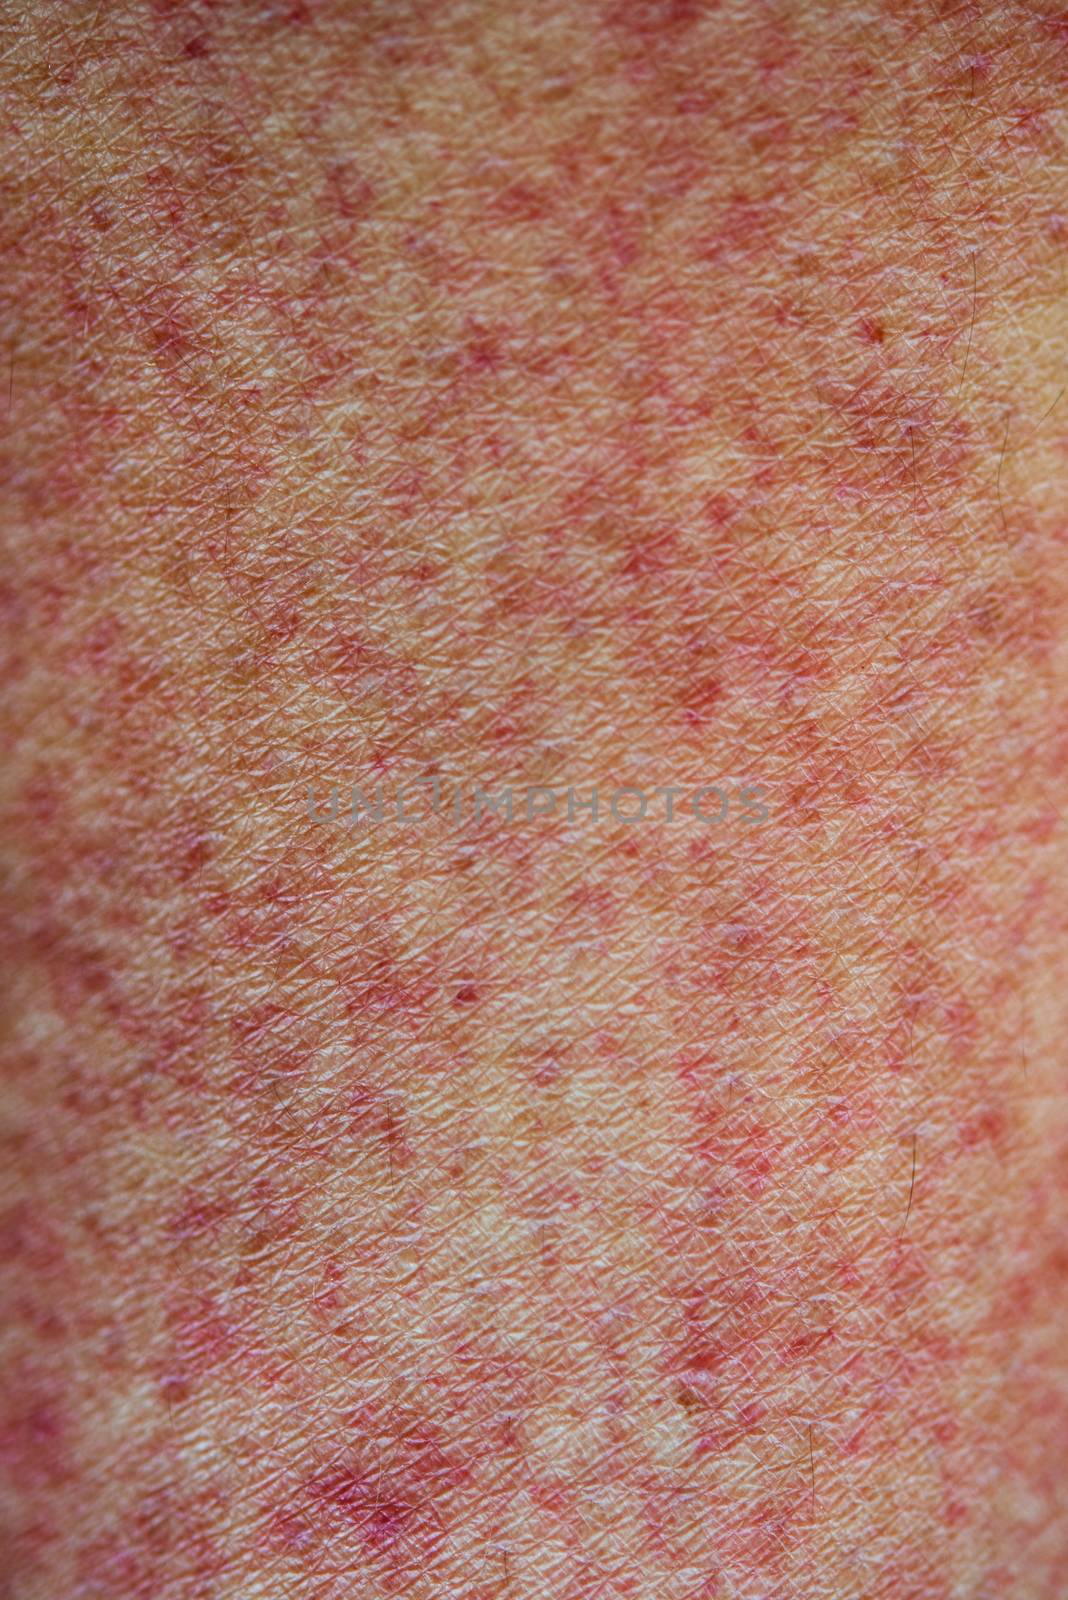 Close up human skin with red rashes, or dengue fever.